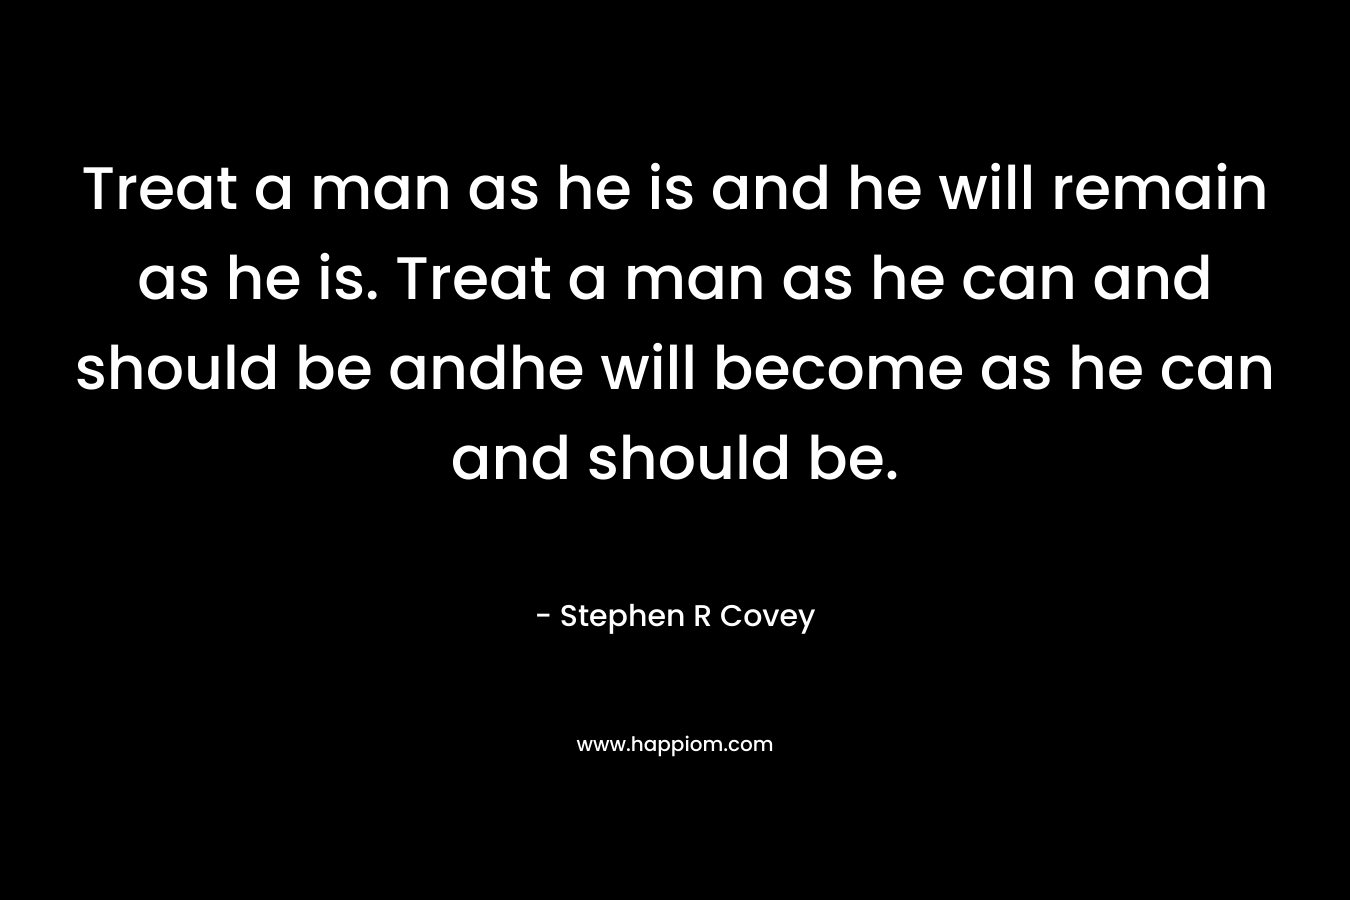 Treat a man as he is and he will remain as he is. Treat a man as he can and should be andhe will become as he can and should be. – Stephen R Covey